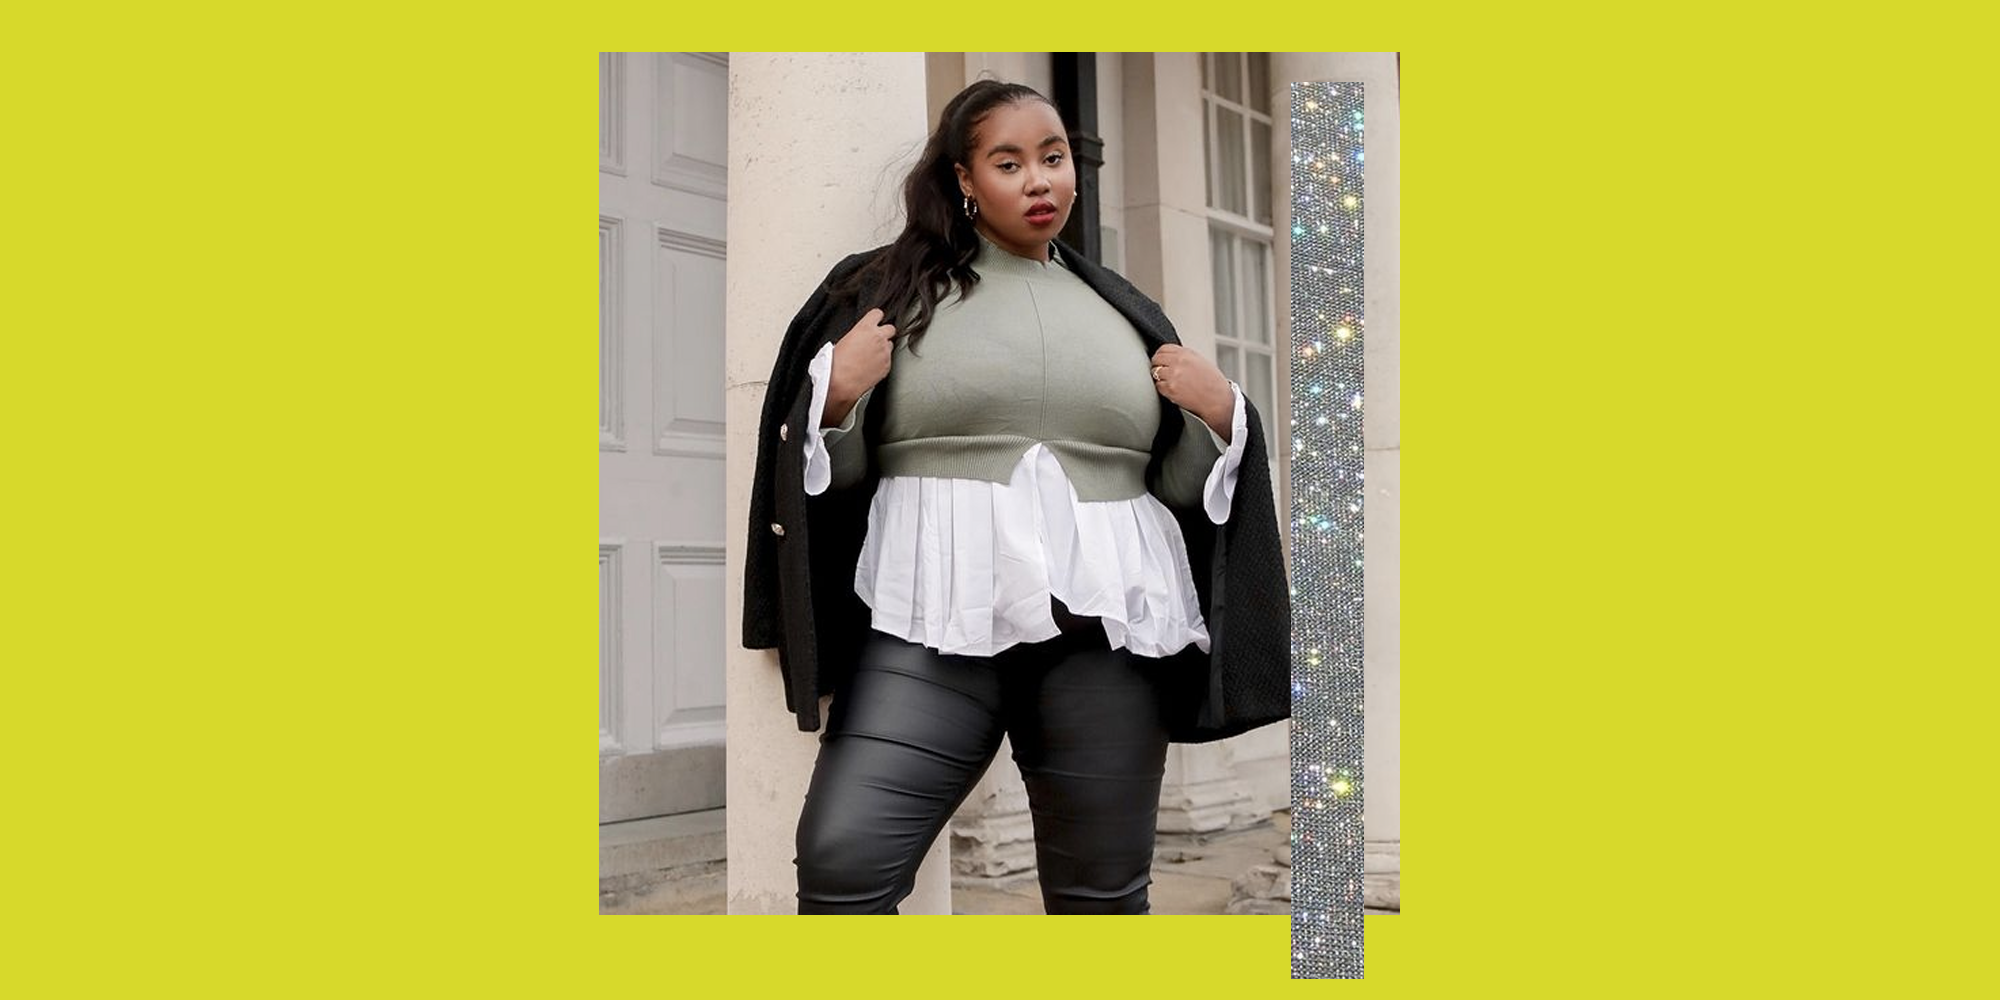 How To Wear Plus Size Wide Leg Pants  Where To Shop Them In Plus